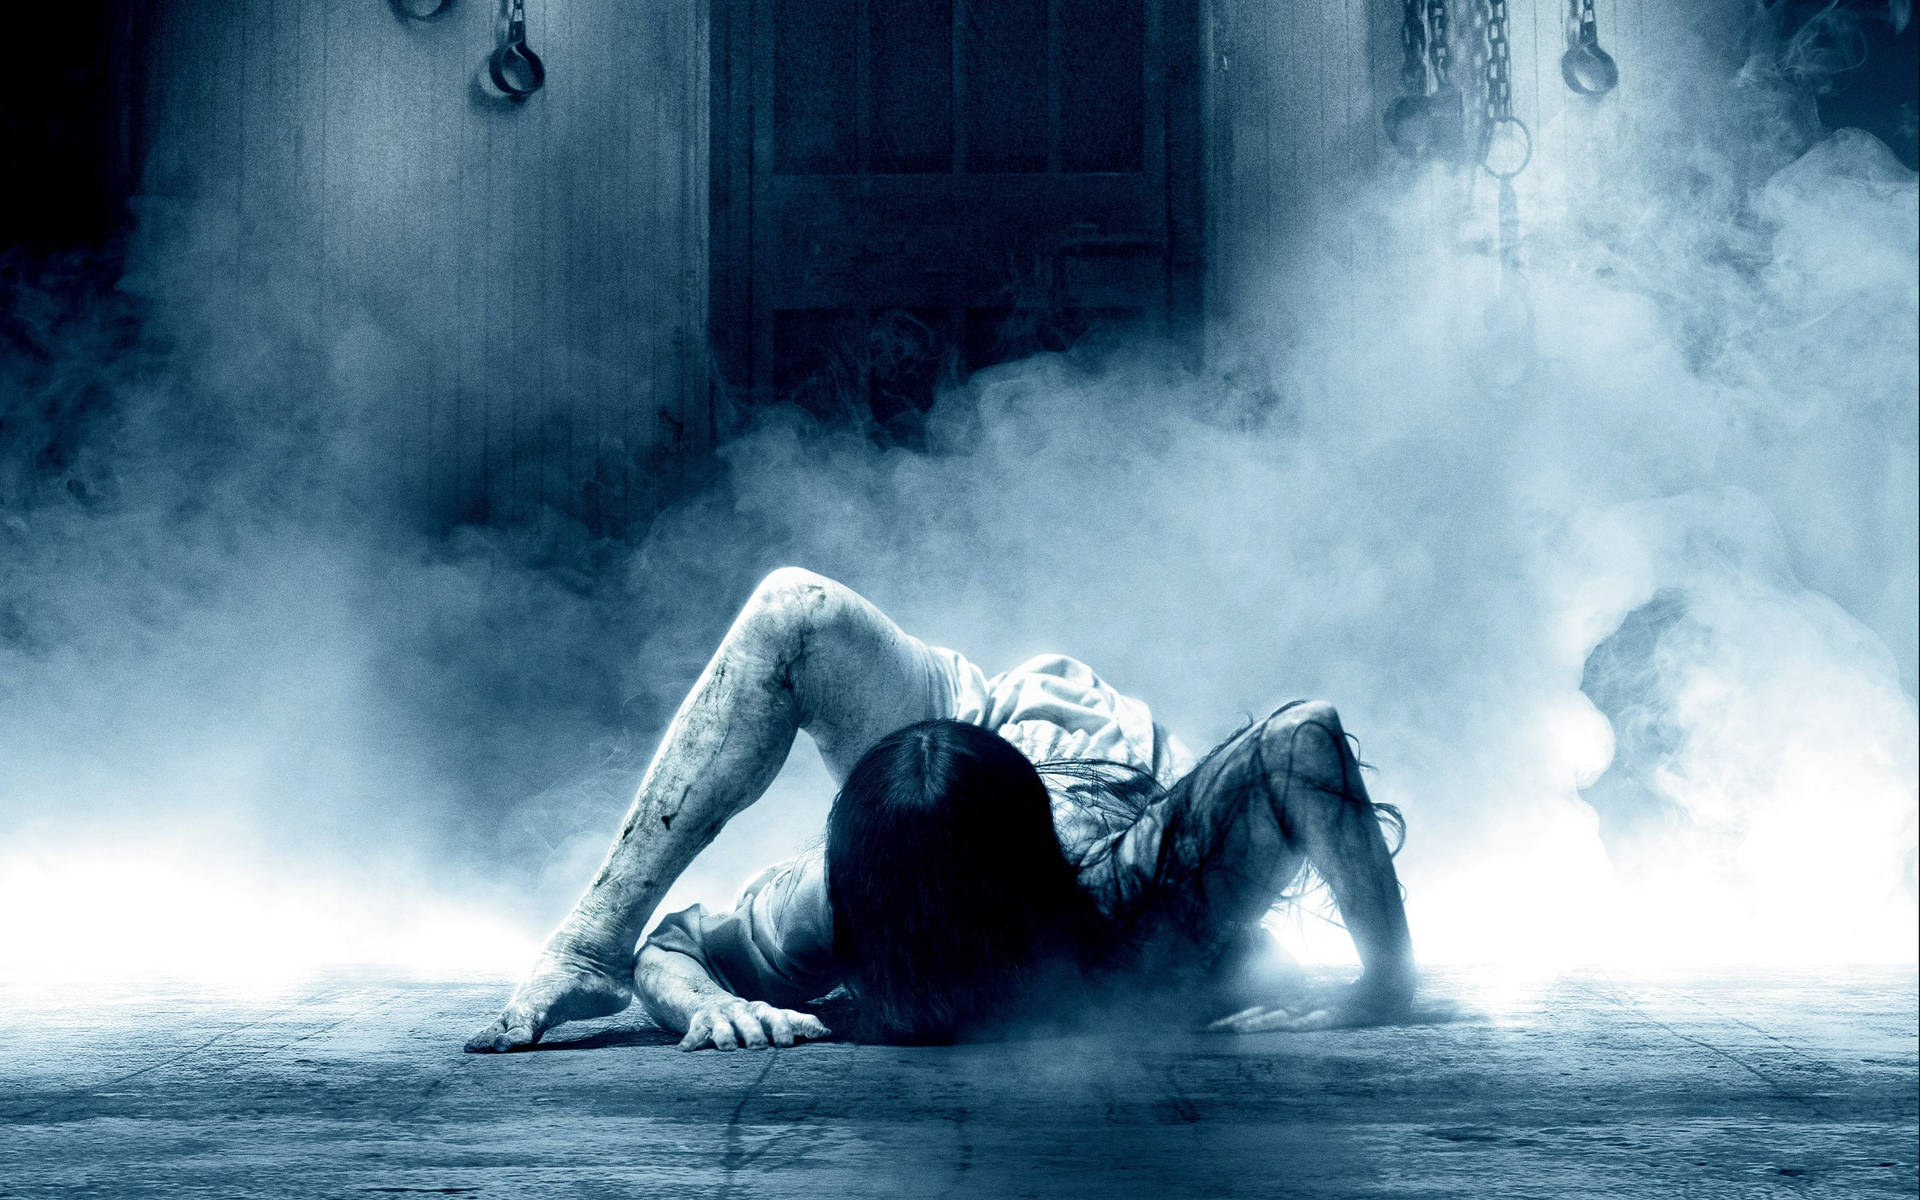 Free Horror Wallpaper Downloads, [500+] Horror Wallpapers for FREE |  